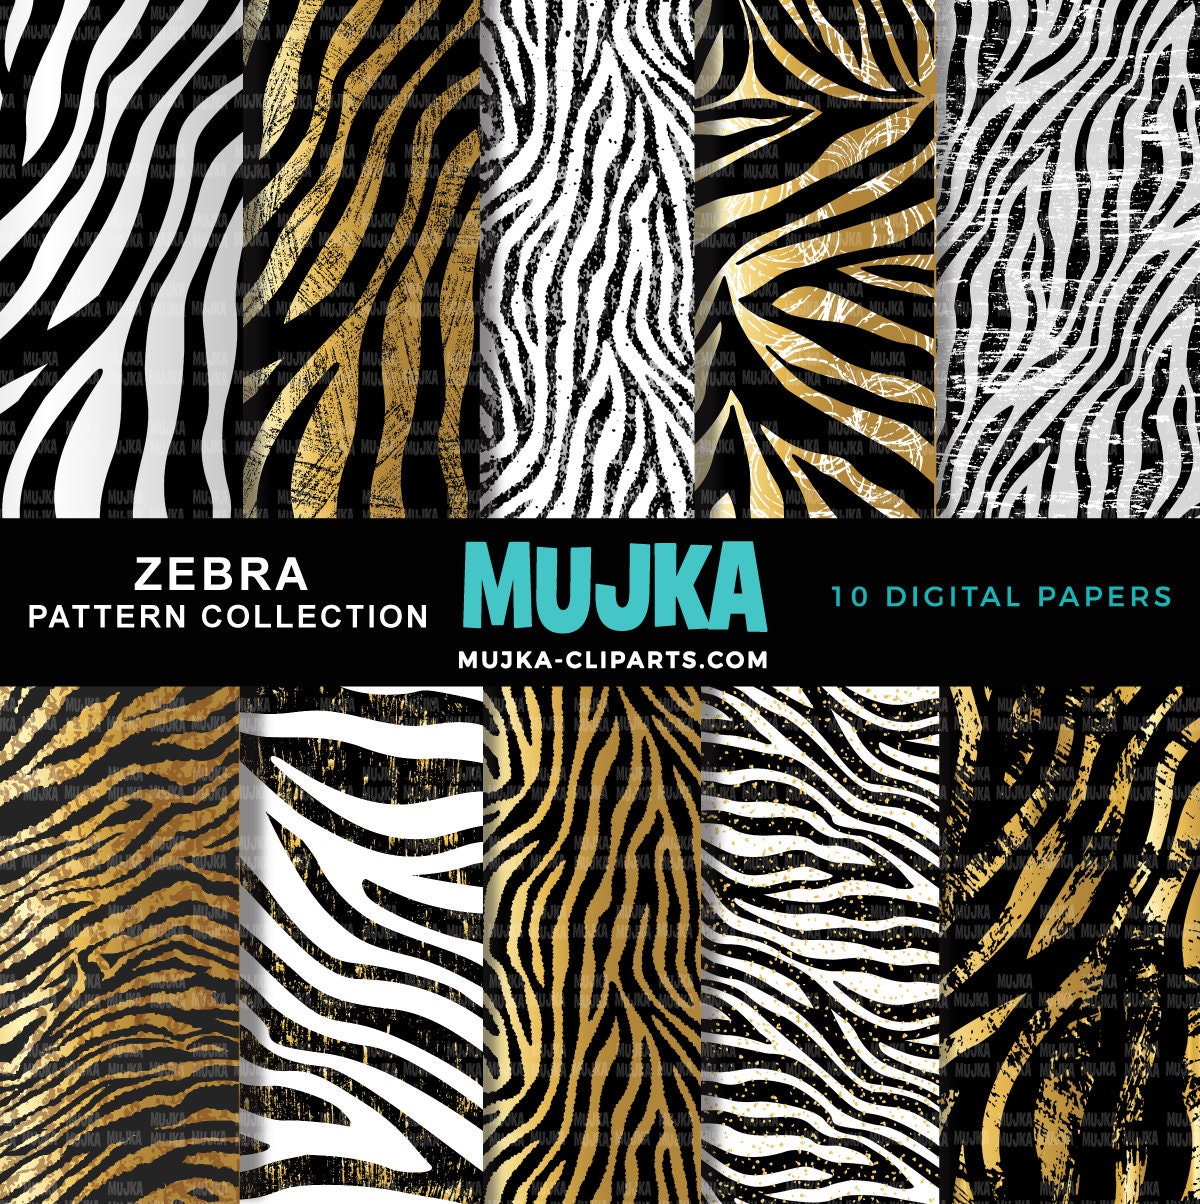 Zebra digital papers, zebra seamless pattern, sublimation designs, digital papers, animal print papers, geometric patterns, scrapbook papers